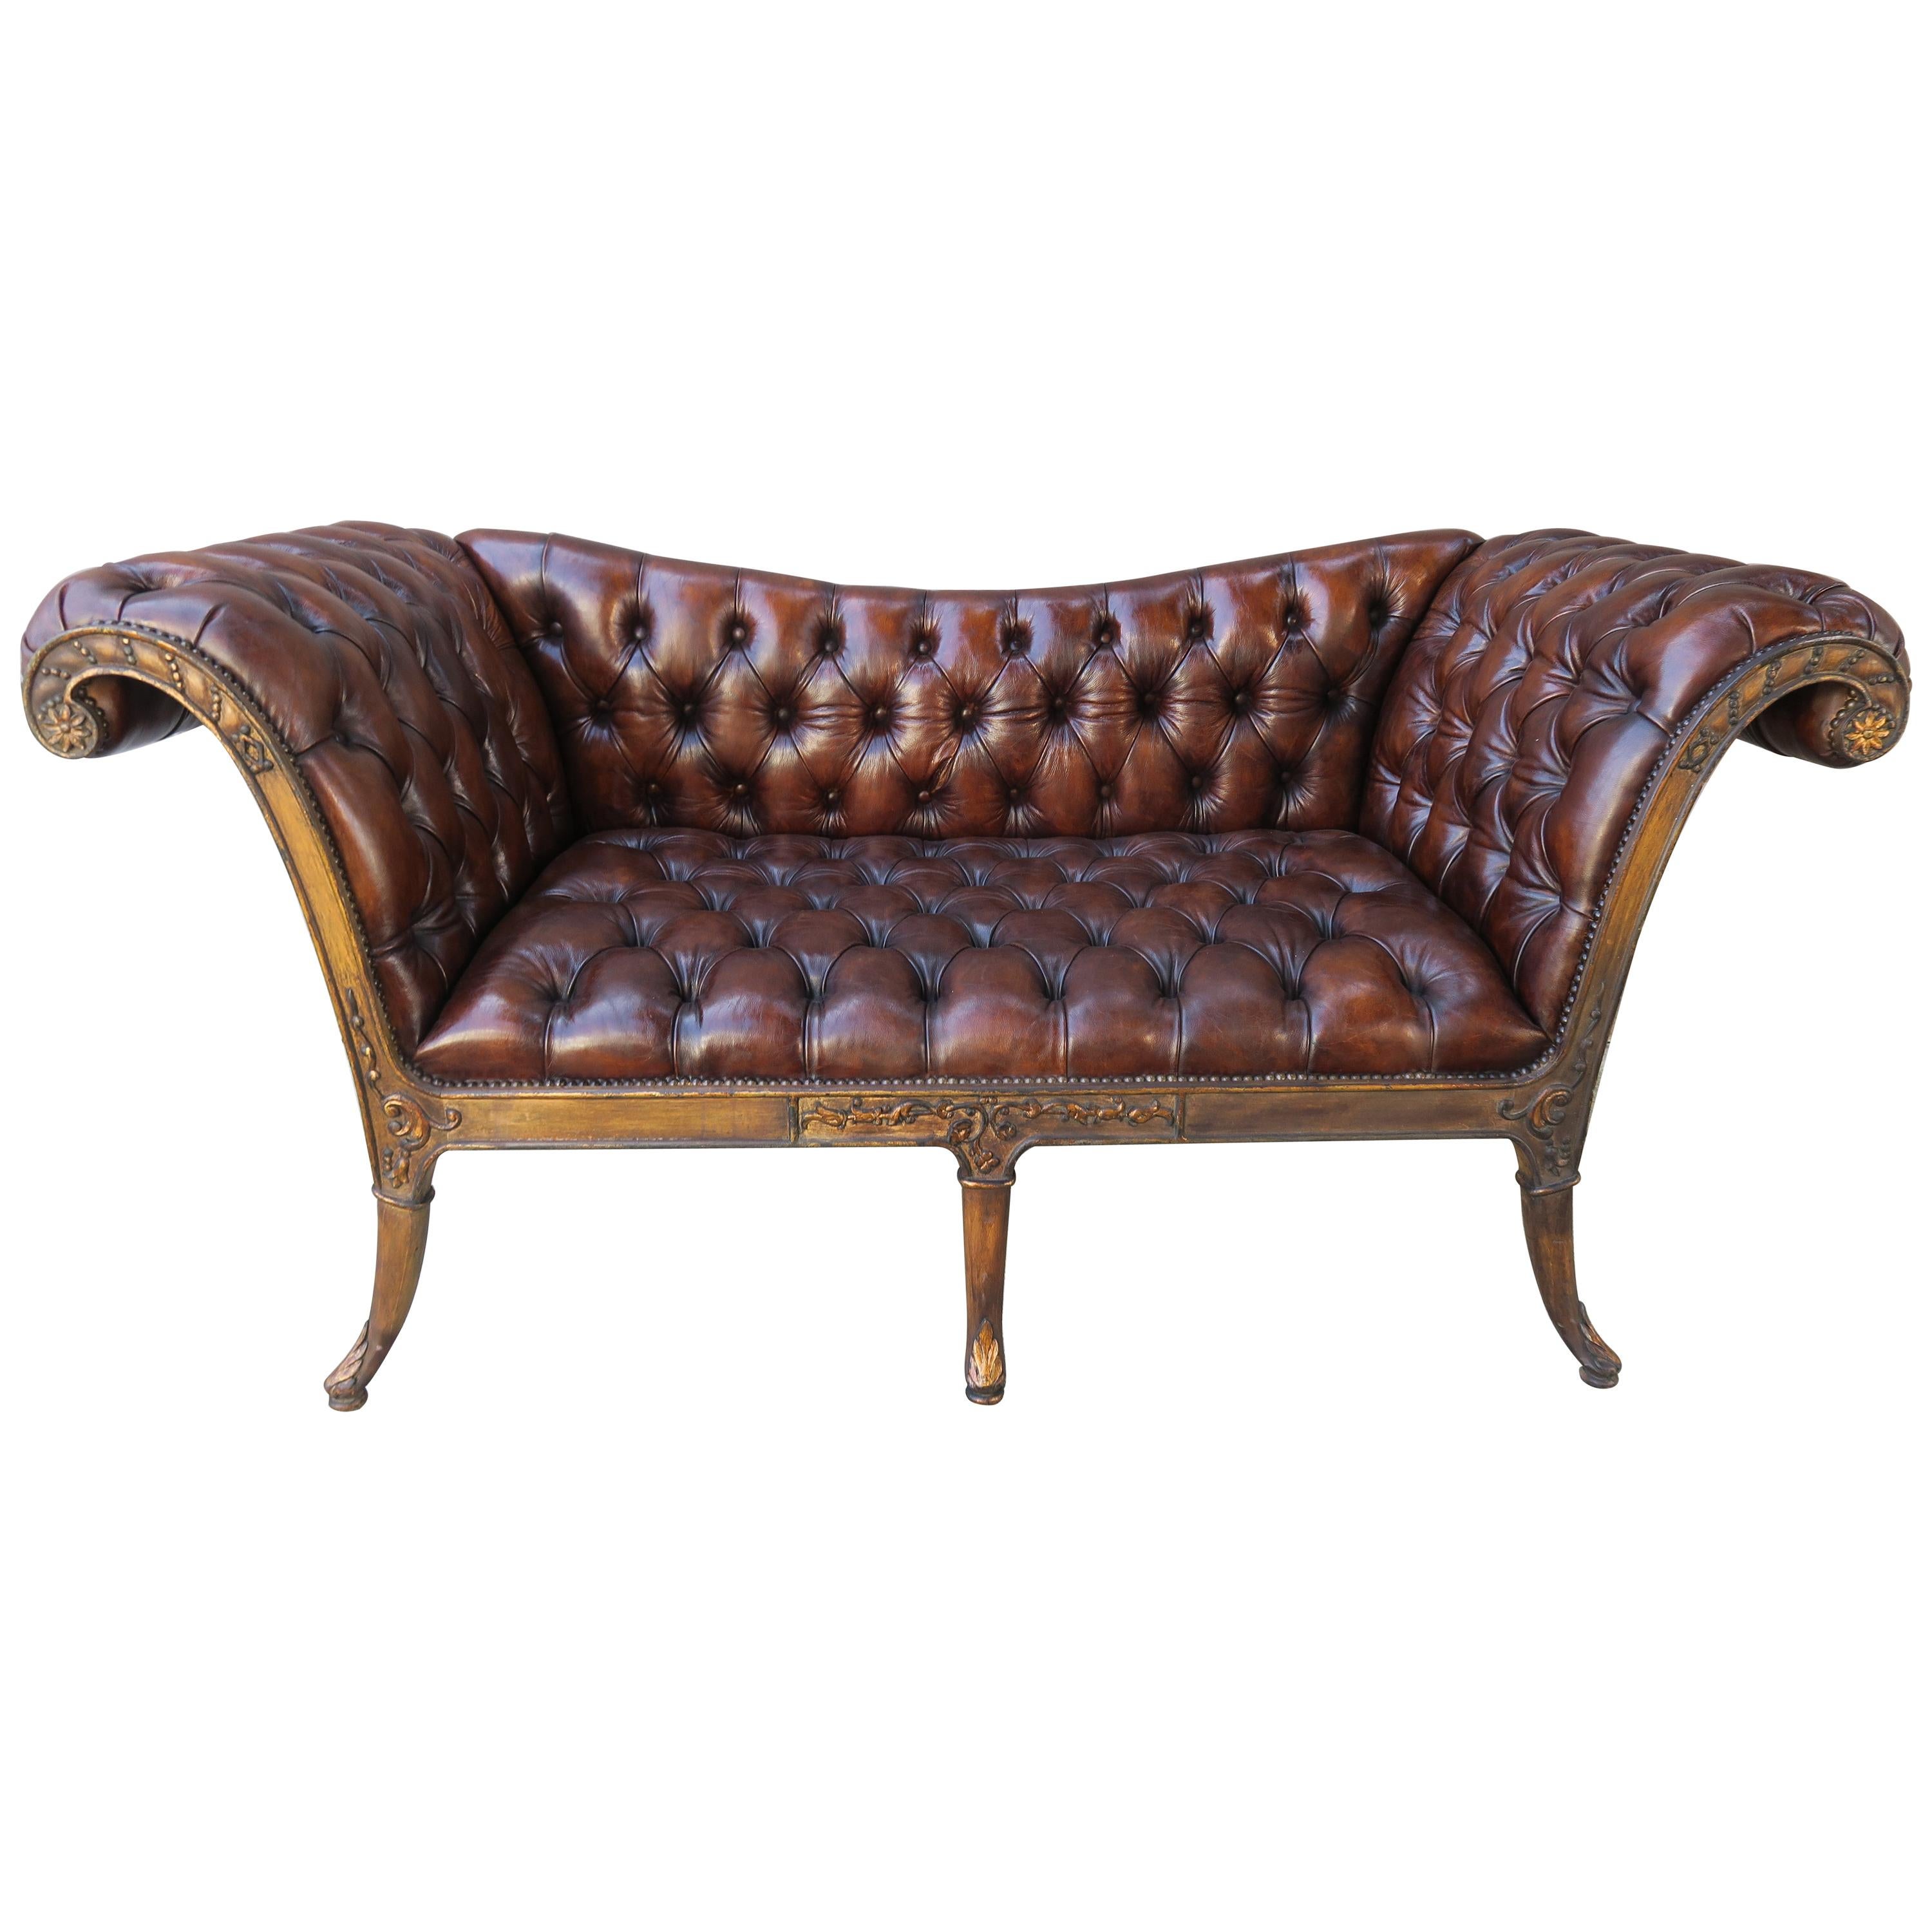 French Regency Style Carved Leather Tufted Sofa, circa 1920s